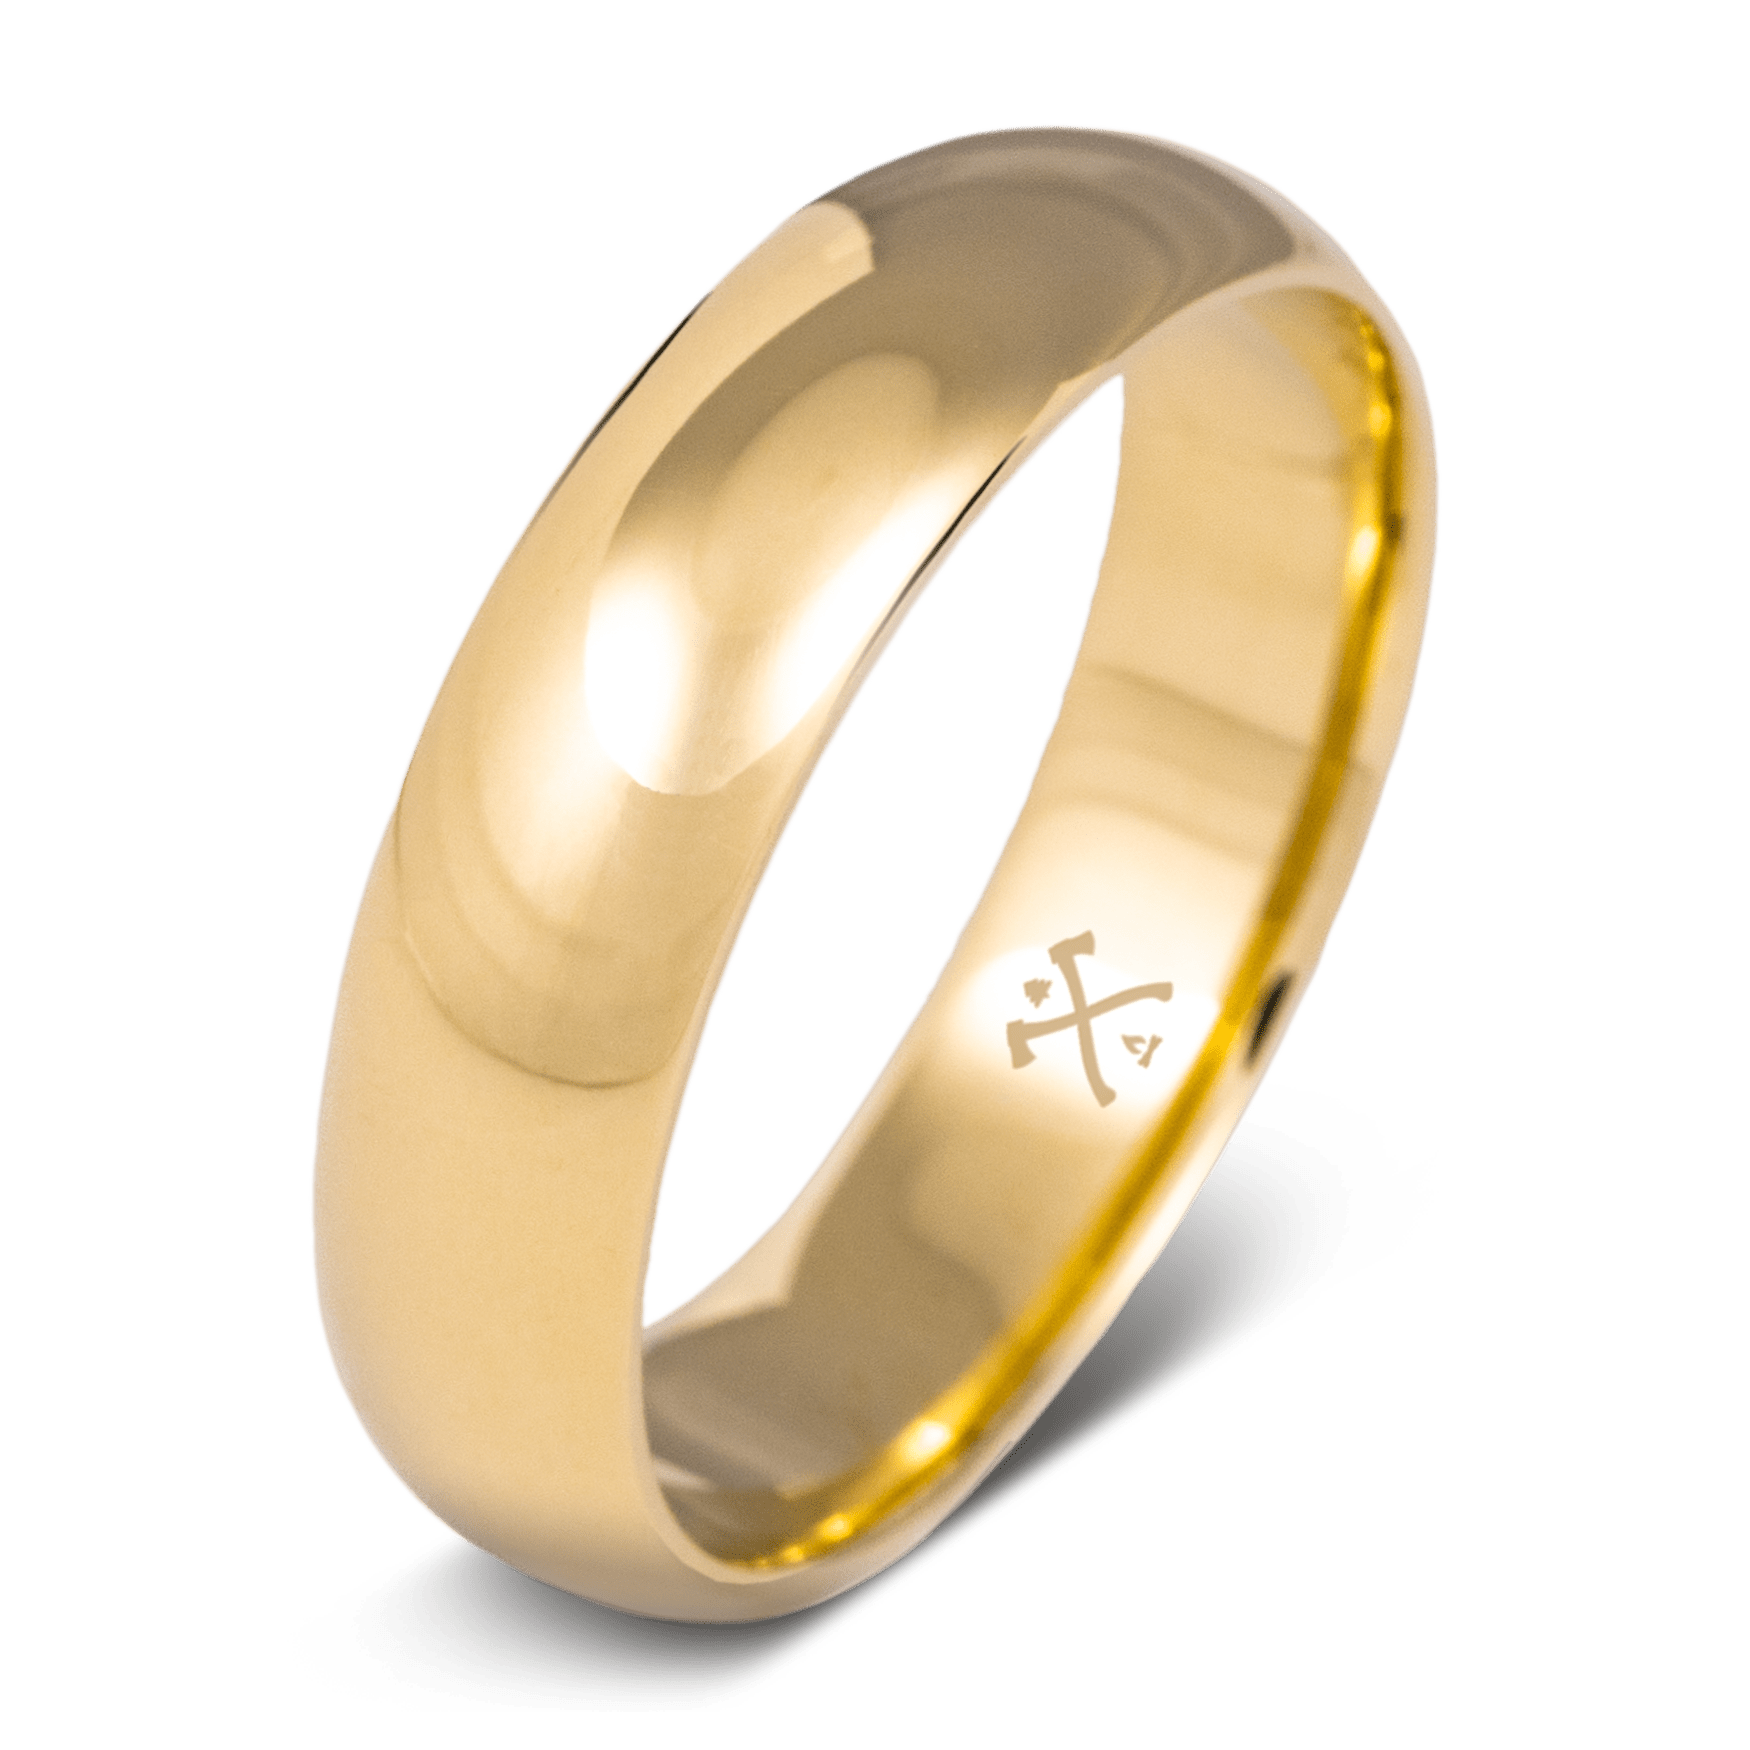 The Prince. Mens gold wedding band made of yellow gold 